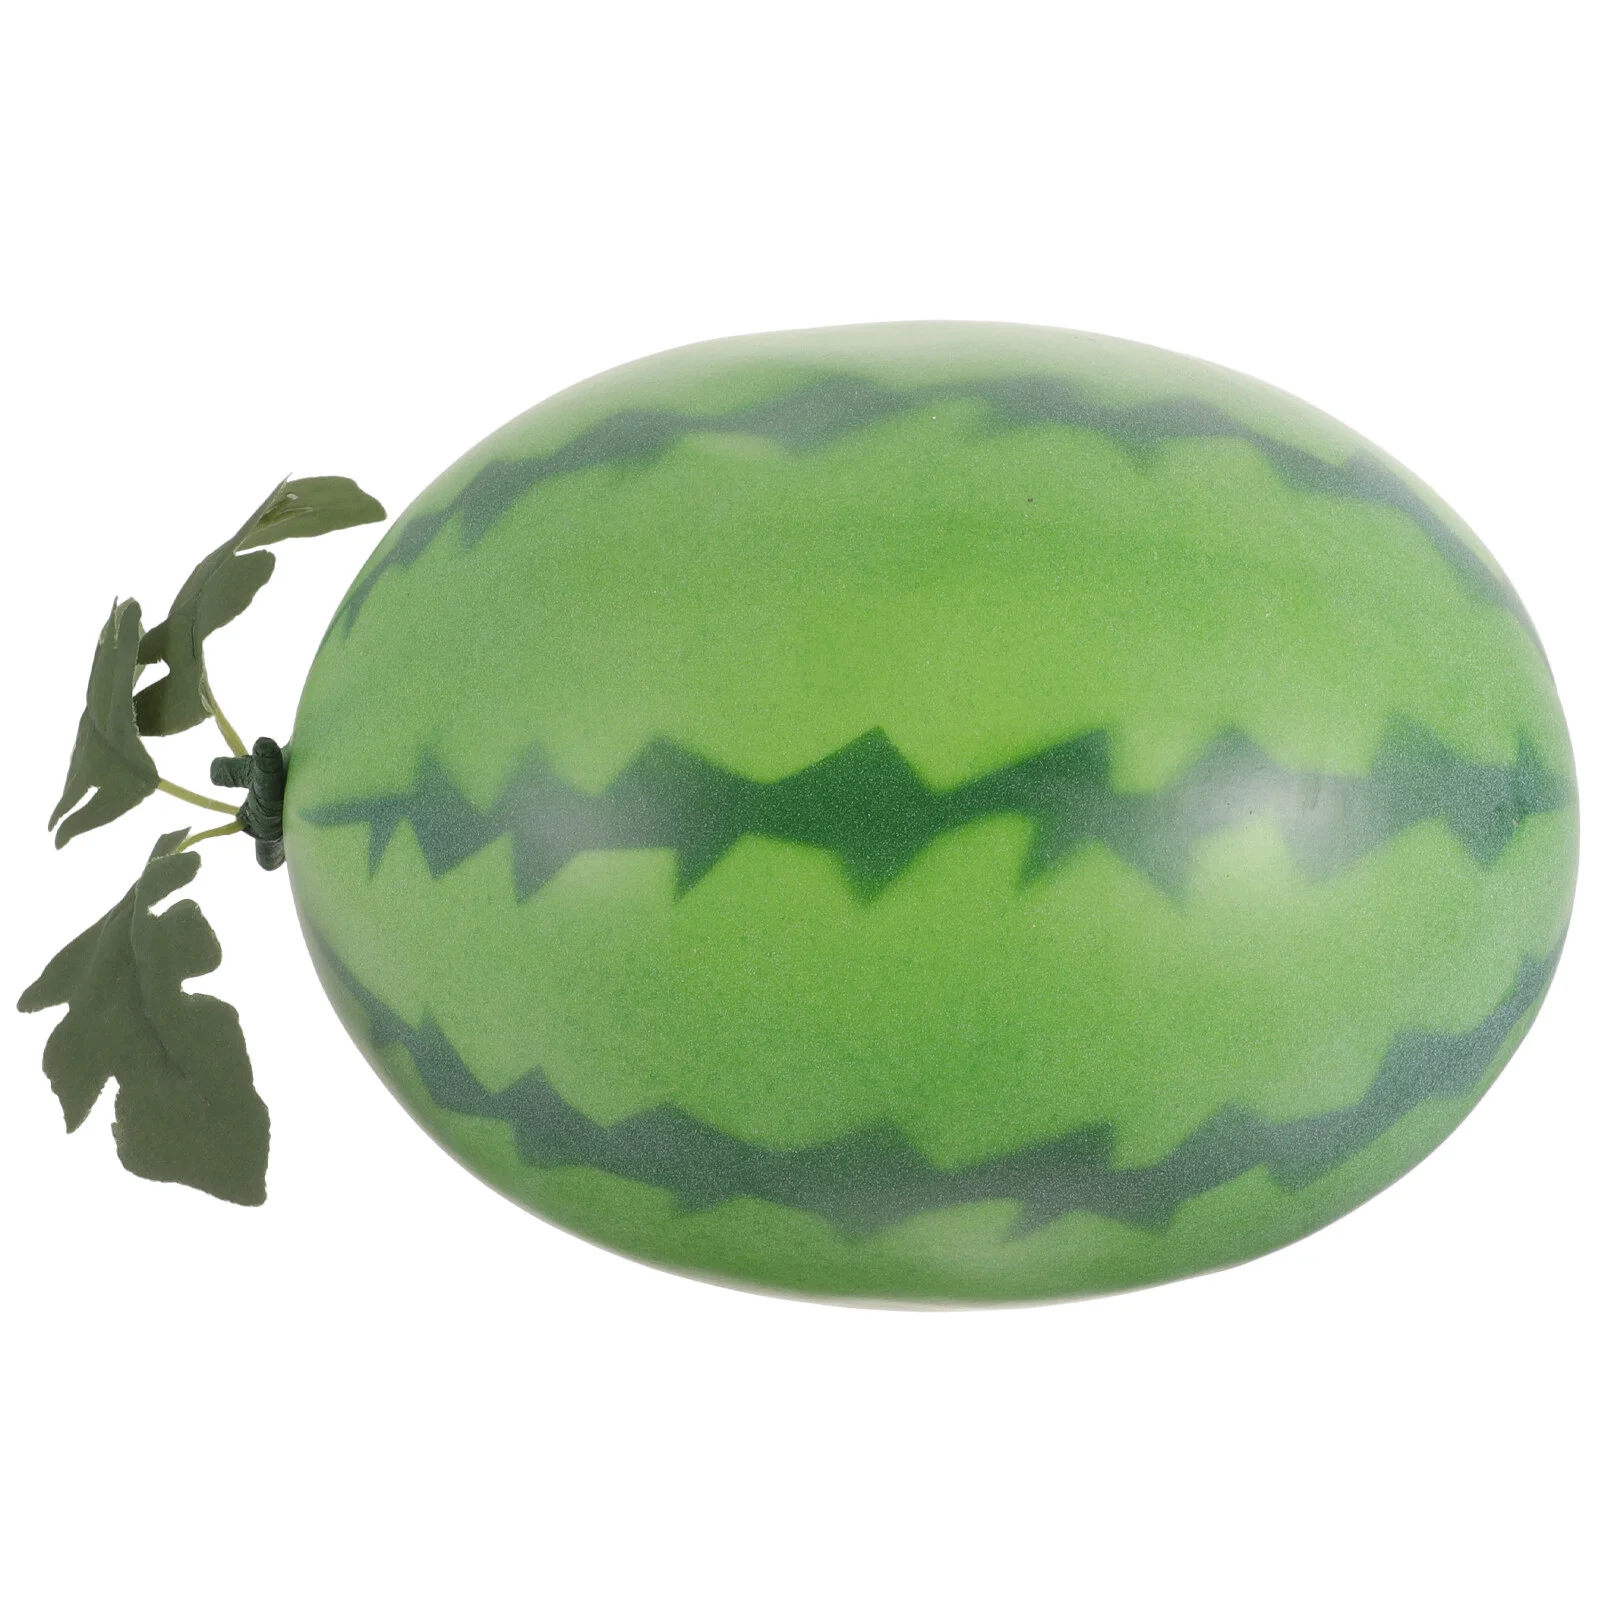 

Watermelon Slices Fake Model Lifelike Fruit Decorations Photography Props Display